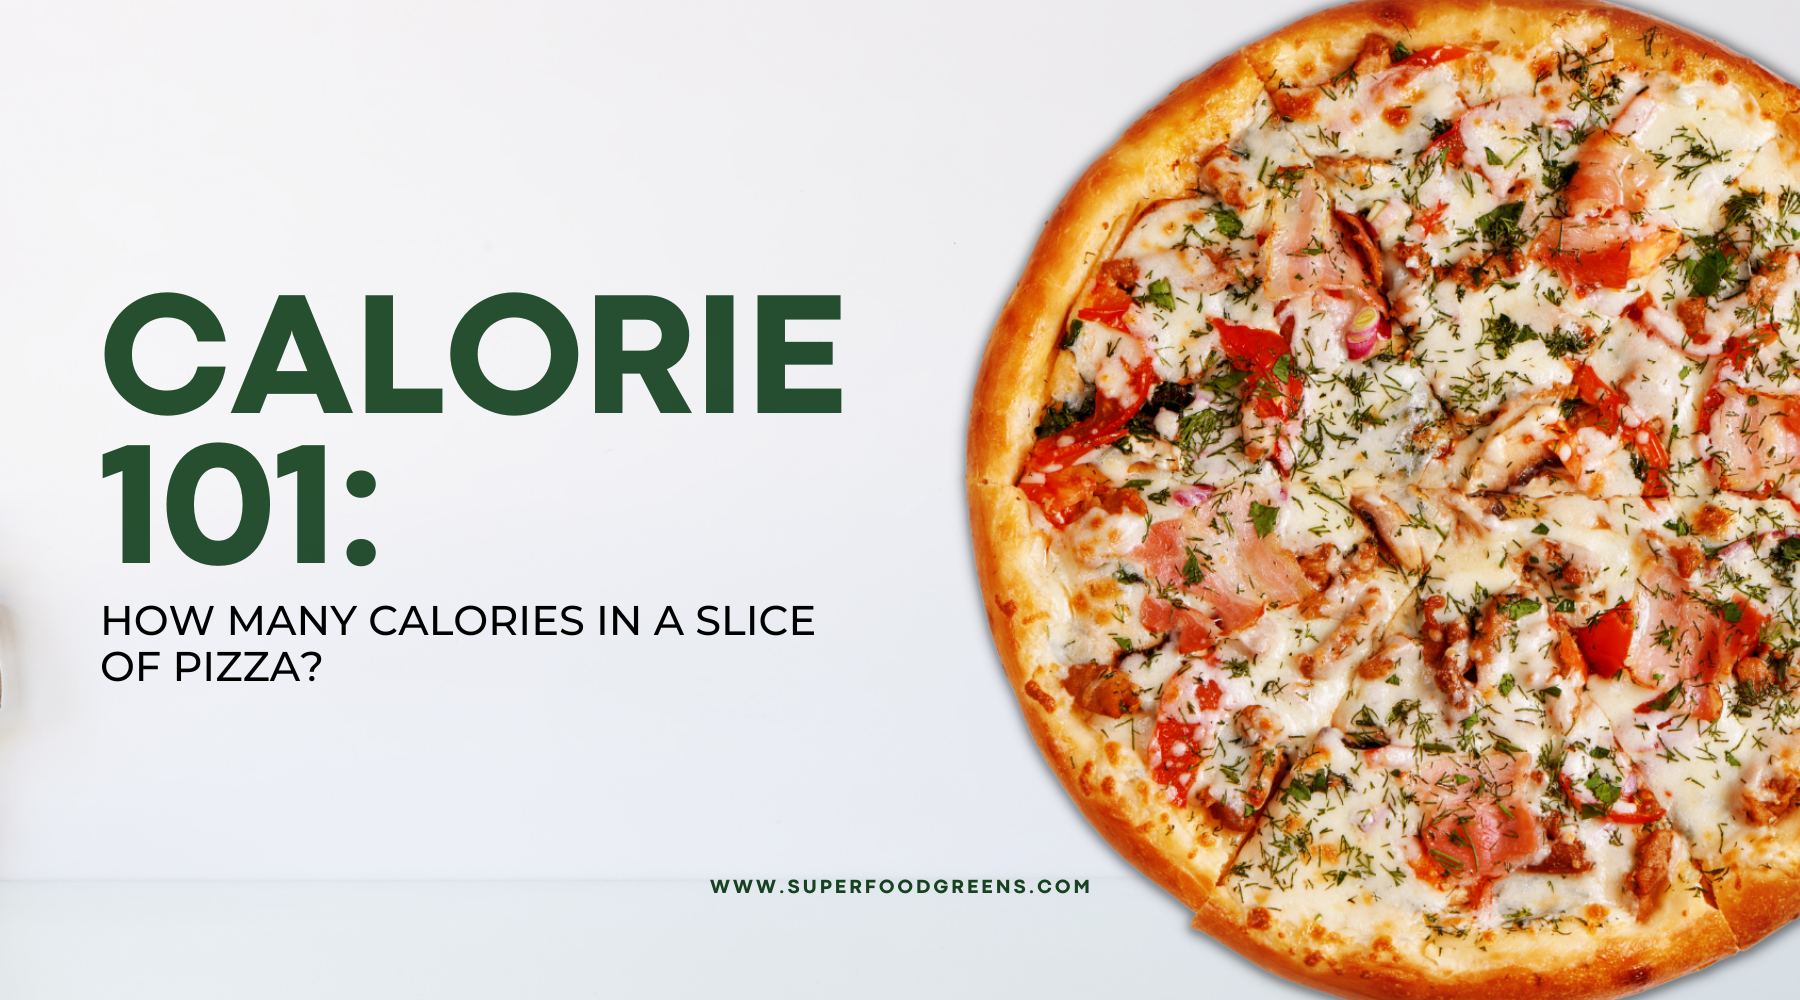 Calorie 101: How Many Calories in a Slice of Pizza? | How Many Calories in A Slice of Pizza